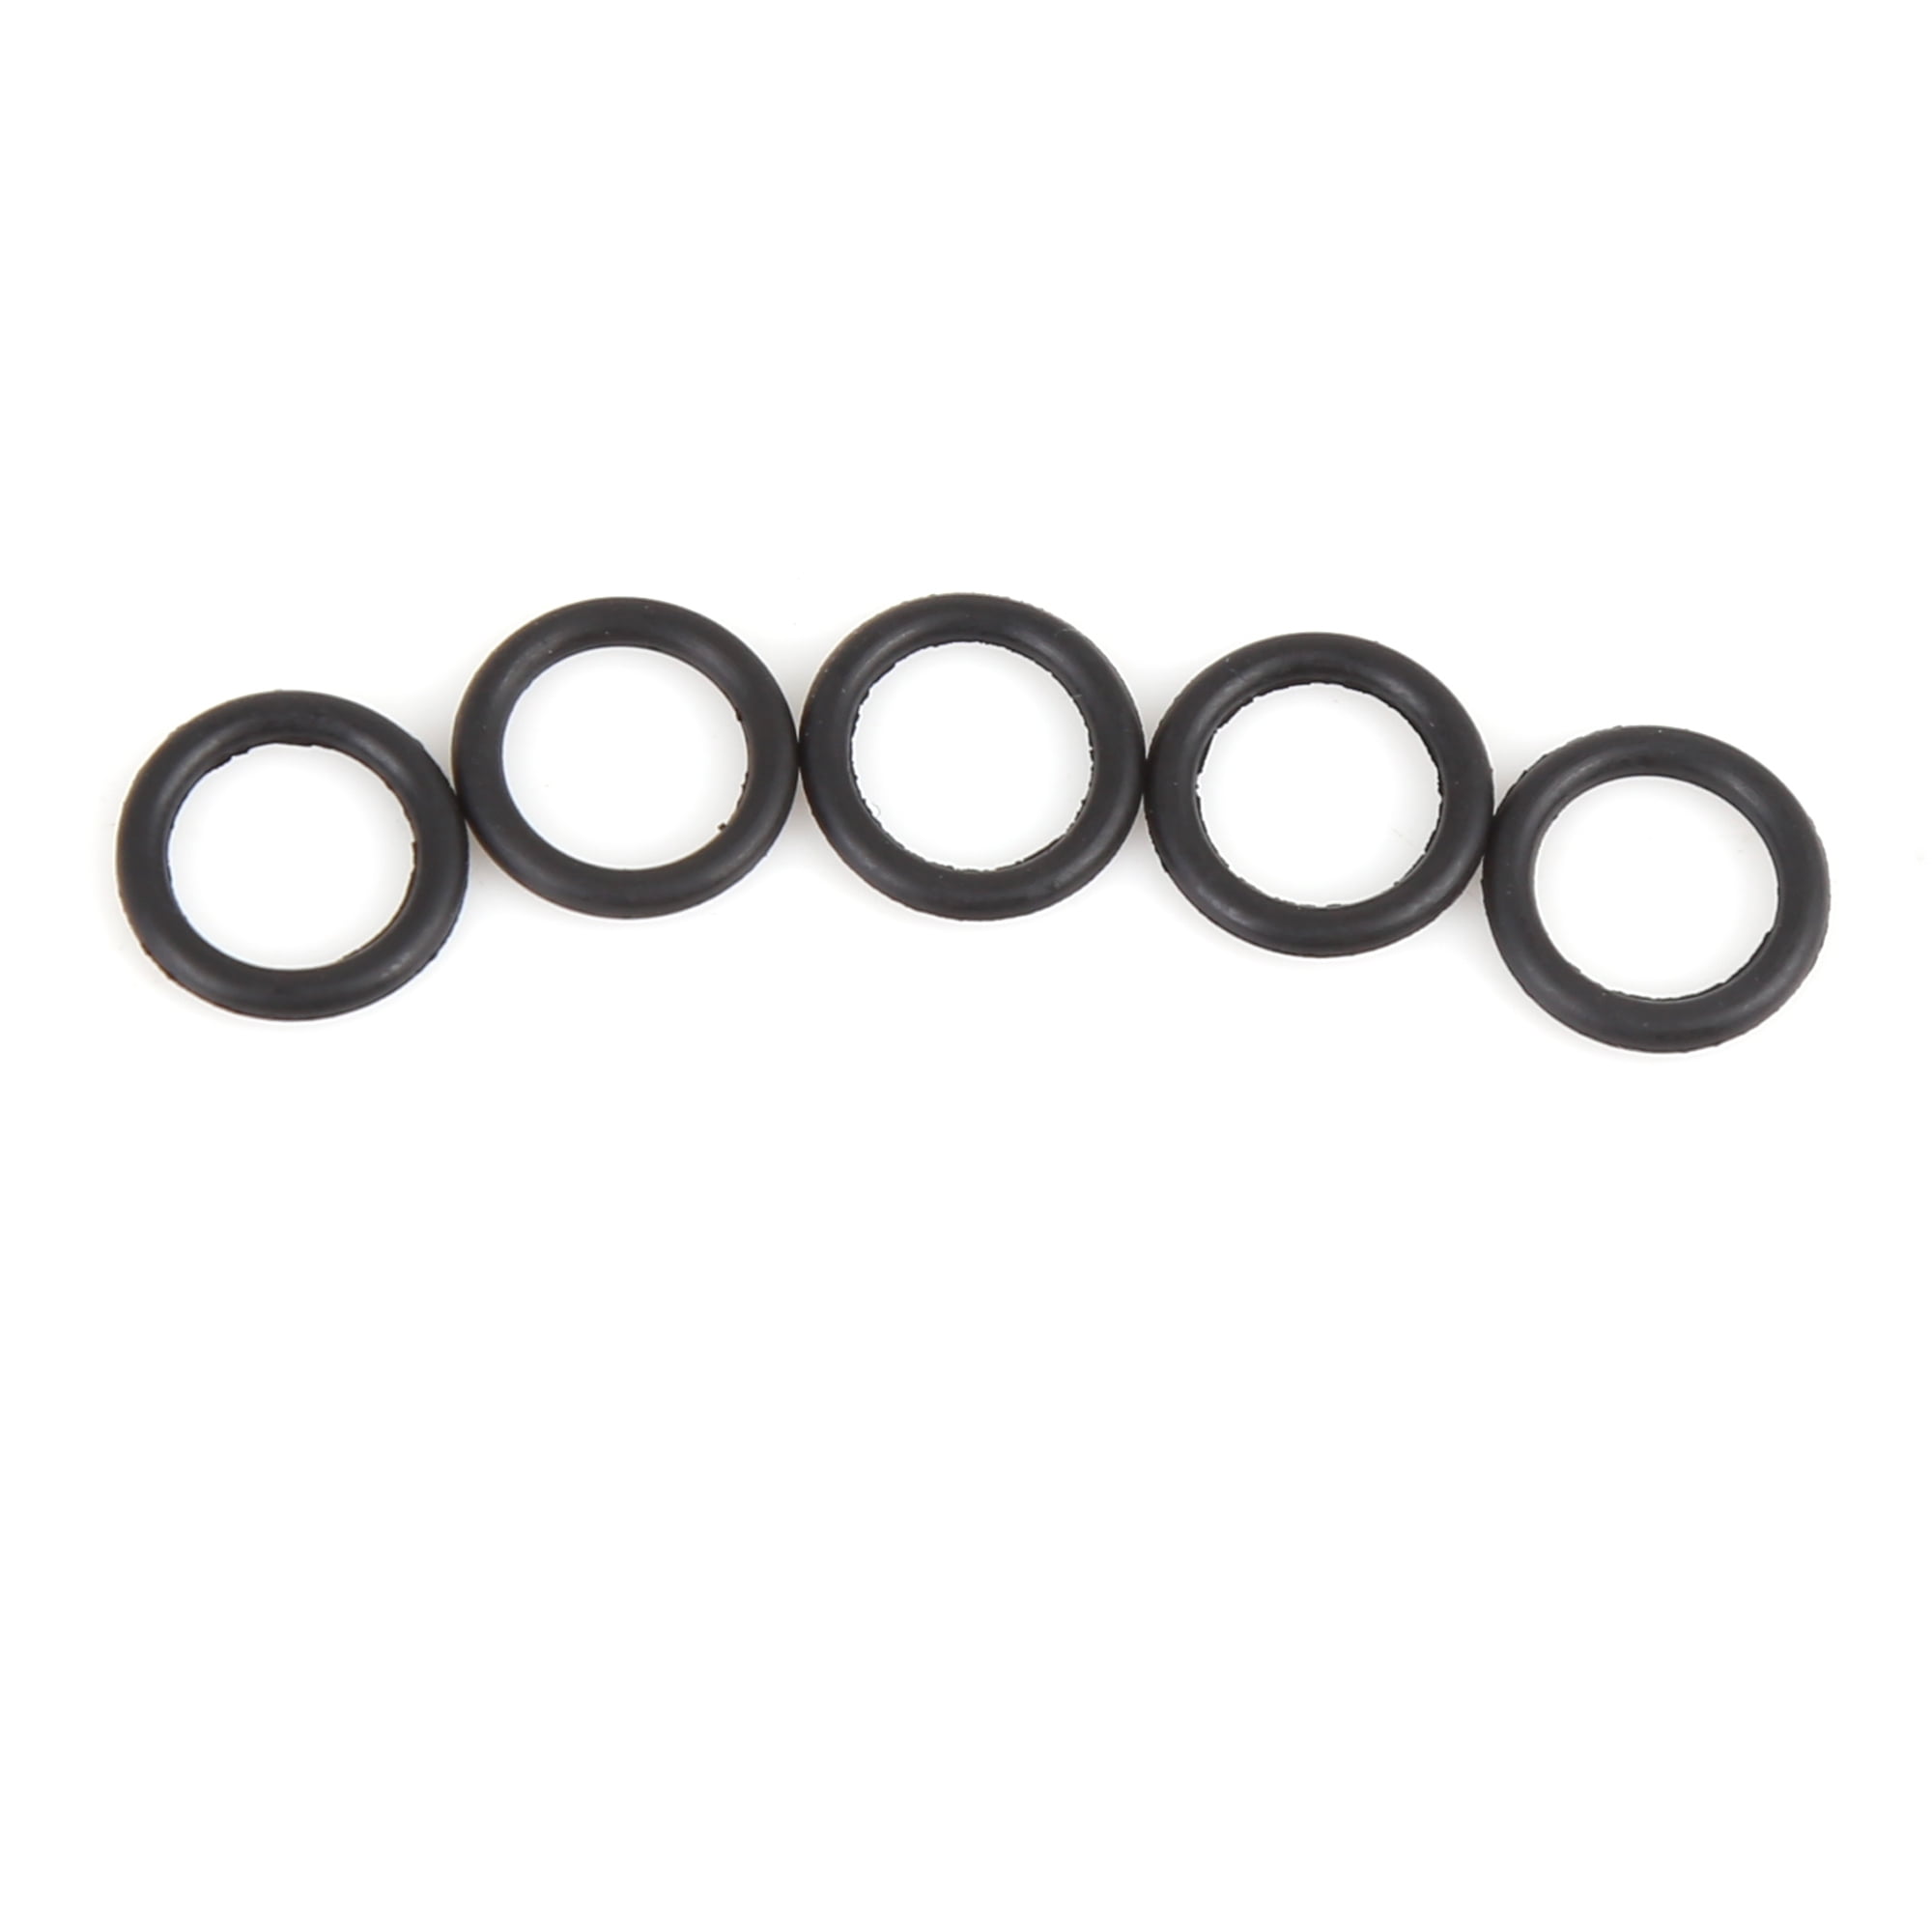 1.5mm Section 13mm Bore VITON Rubber O-Rings 